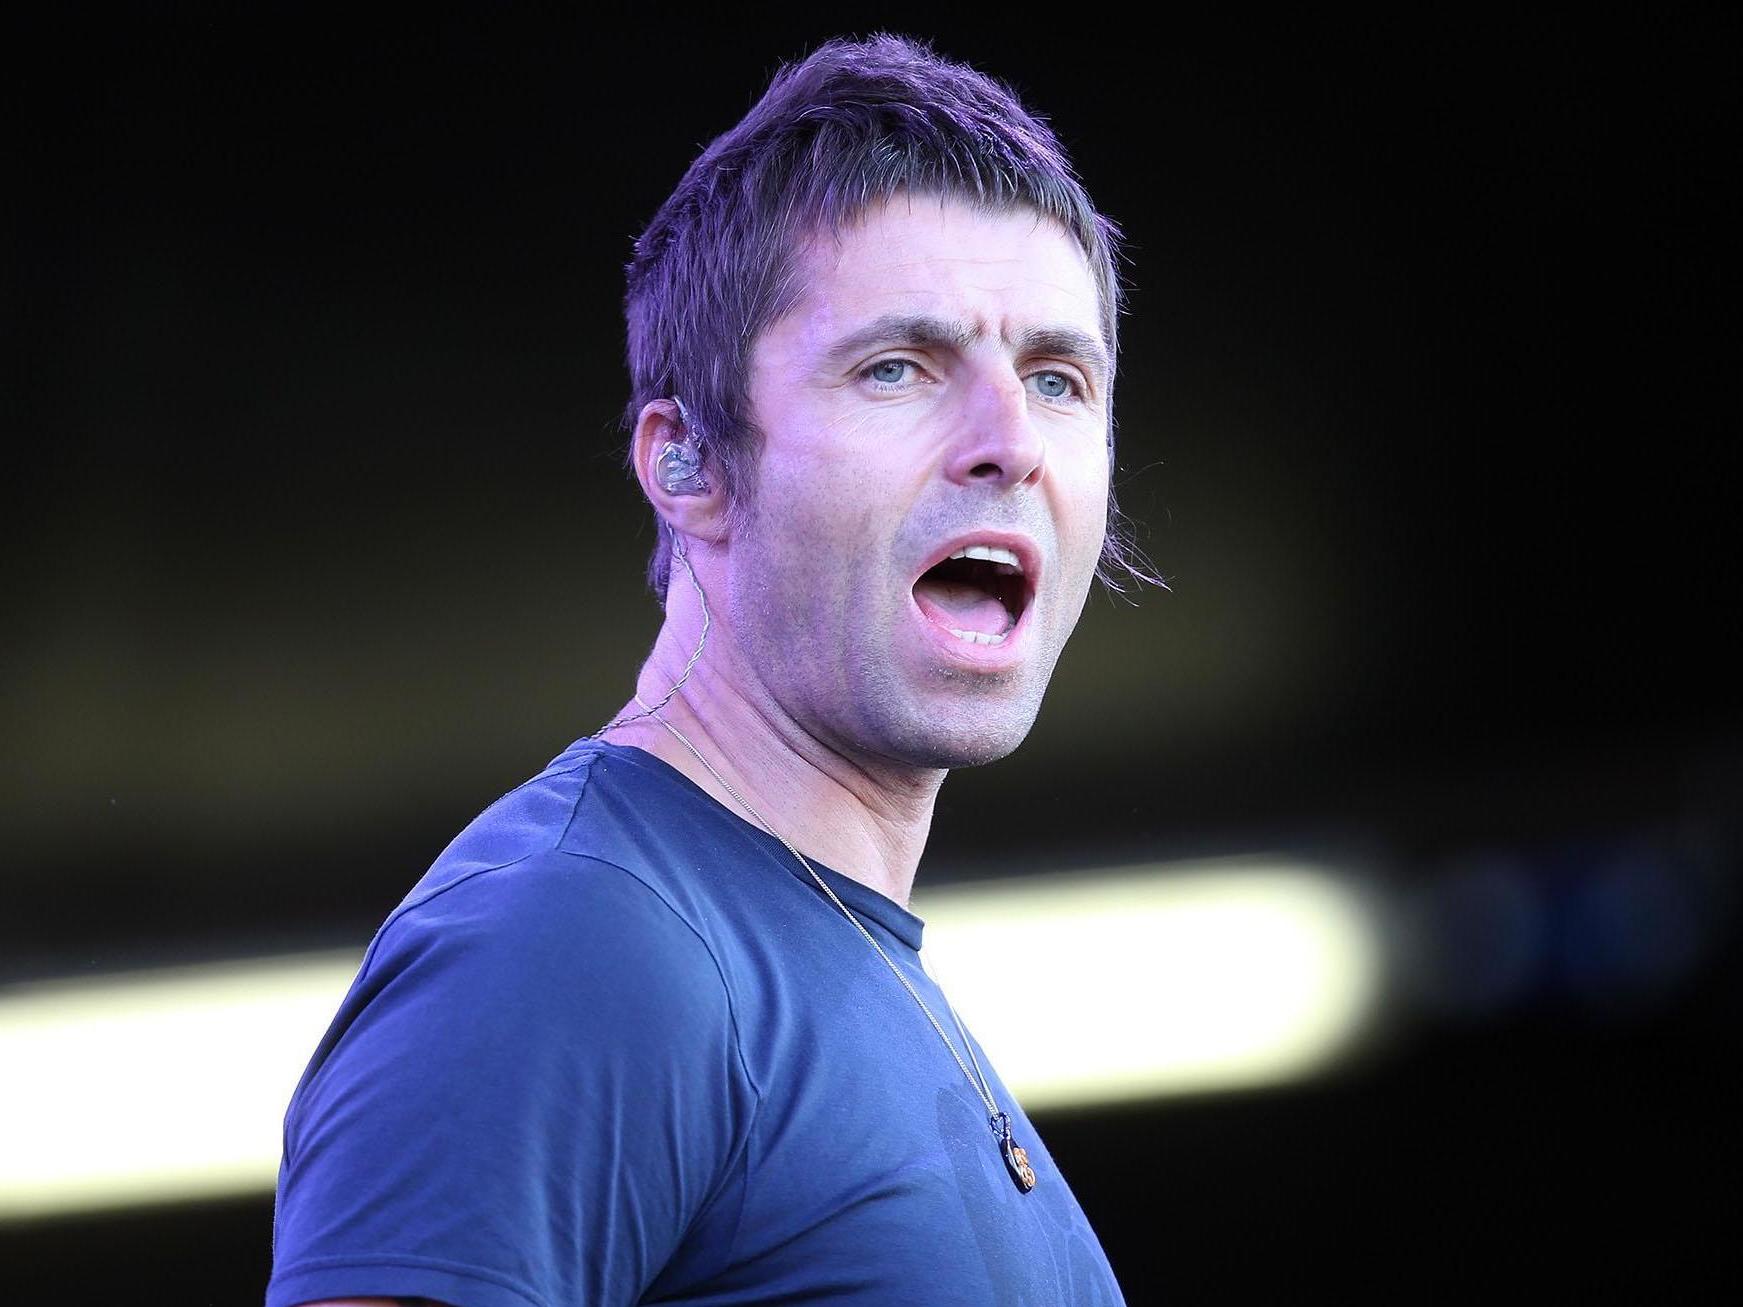 Former Oasis frontman Liam Gallagher has responded to backlash after he called Freddie Mercury a 'goofy c***'.